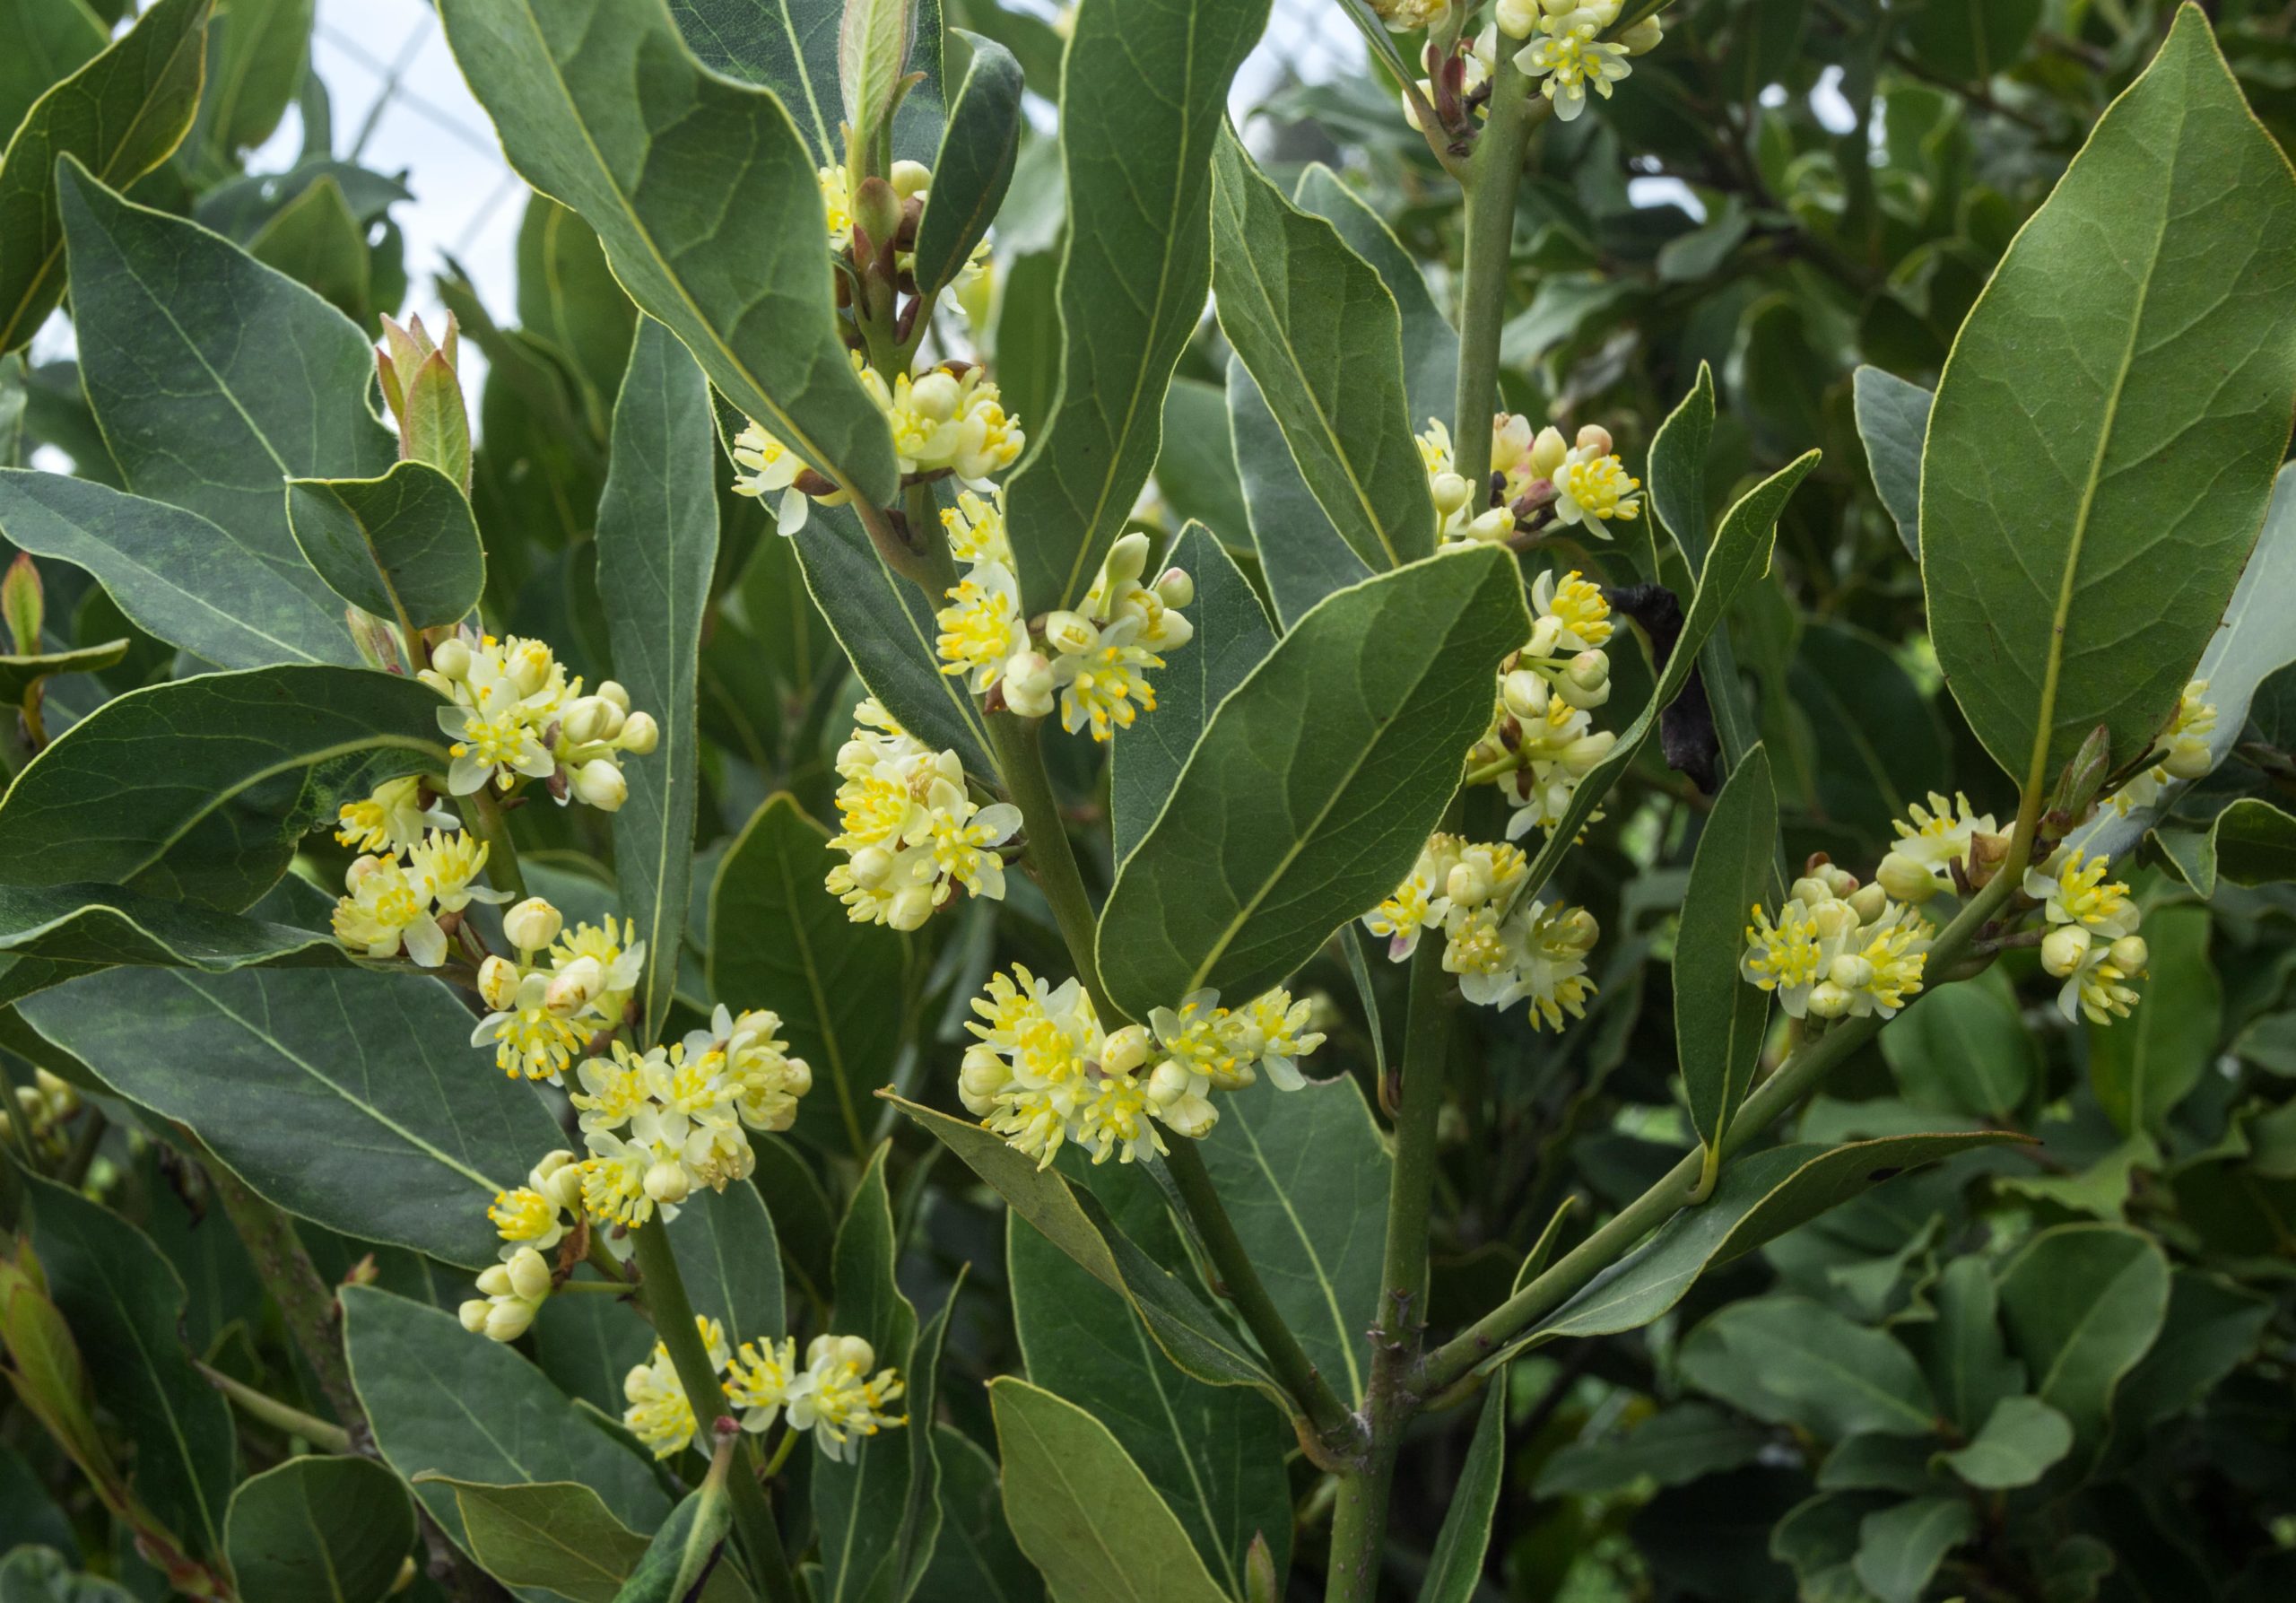 Yellow-colored Laurel blooming in a garden.